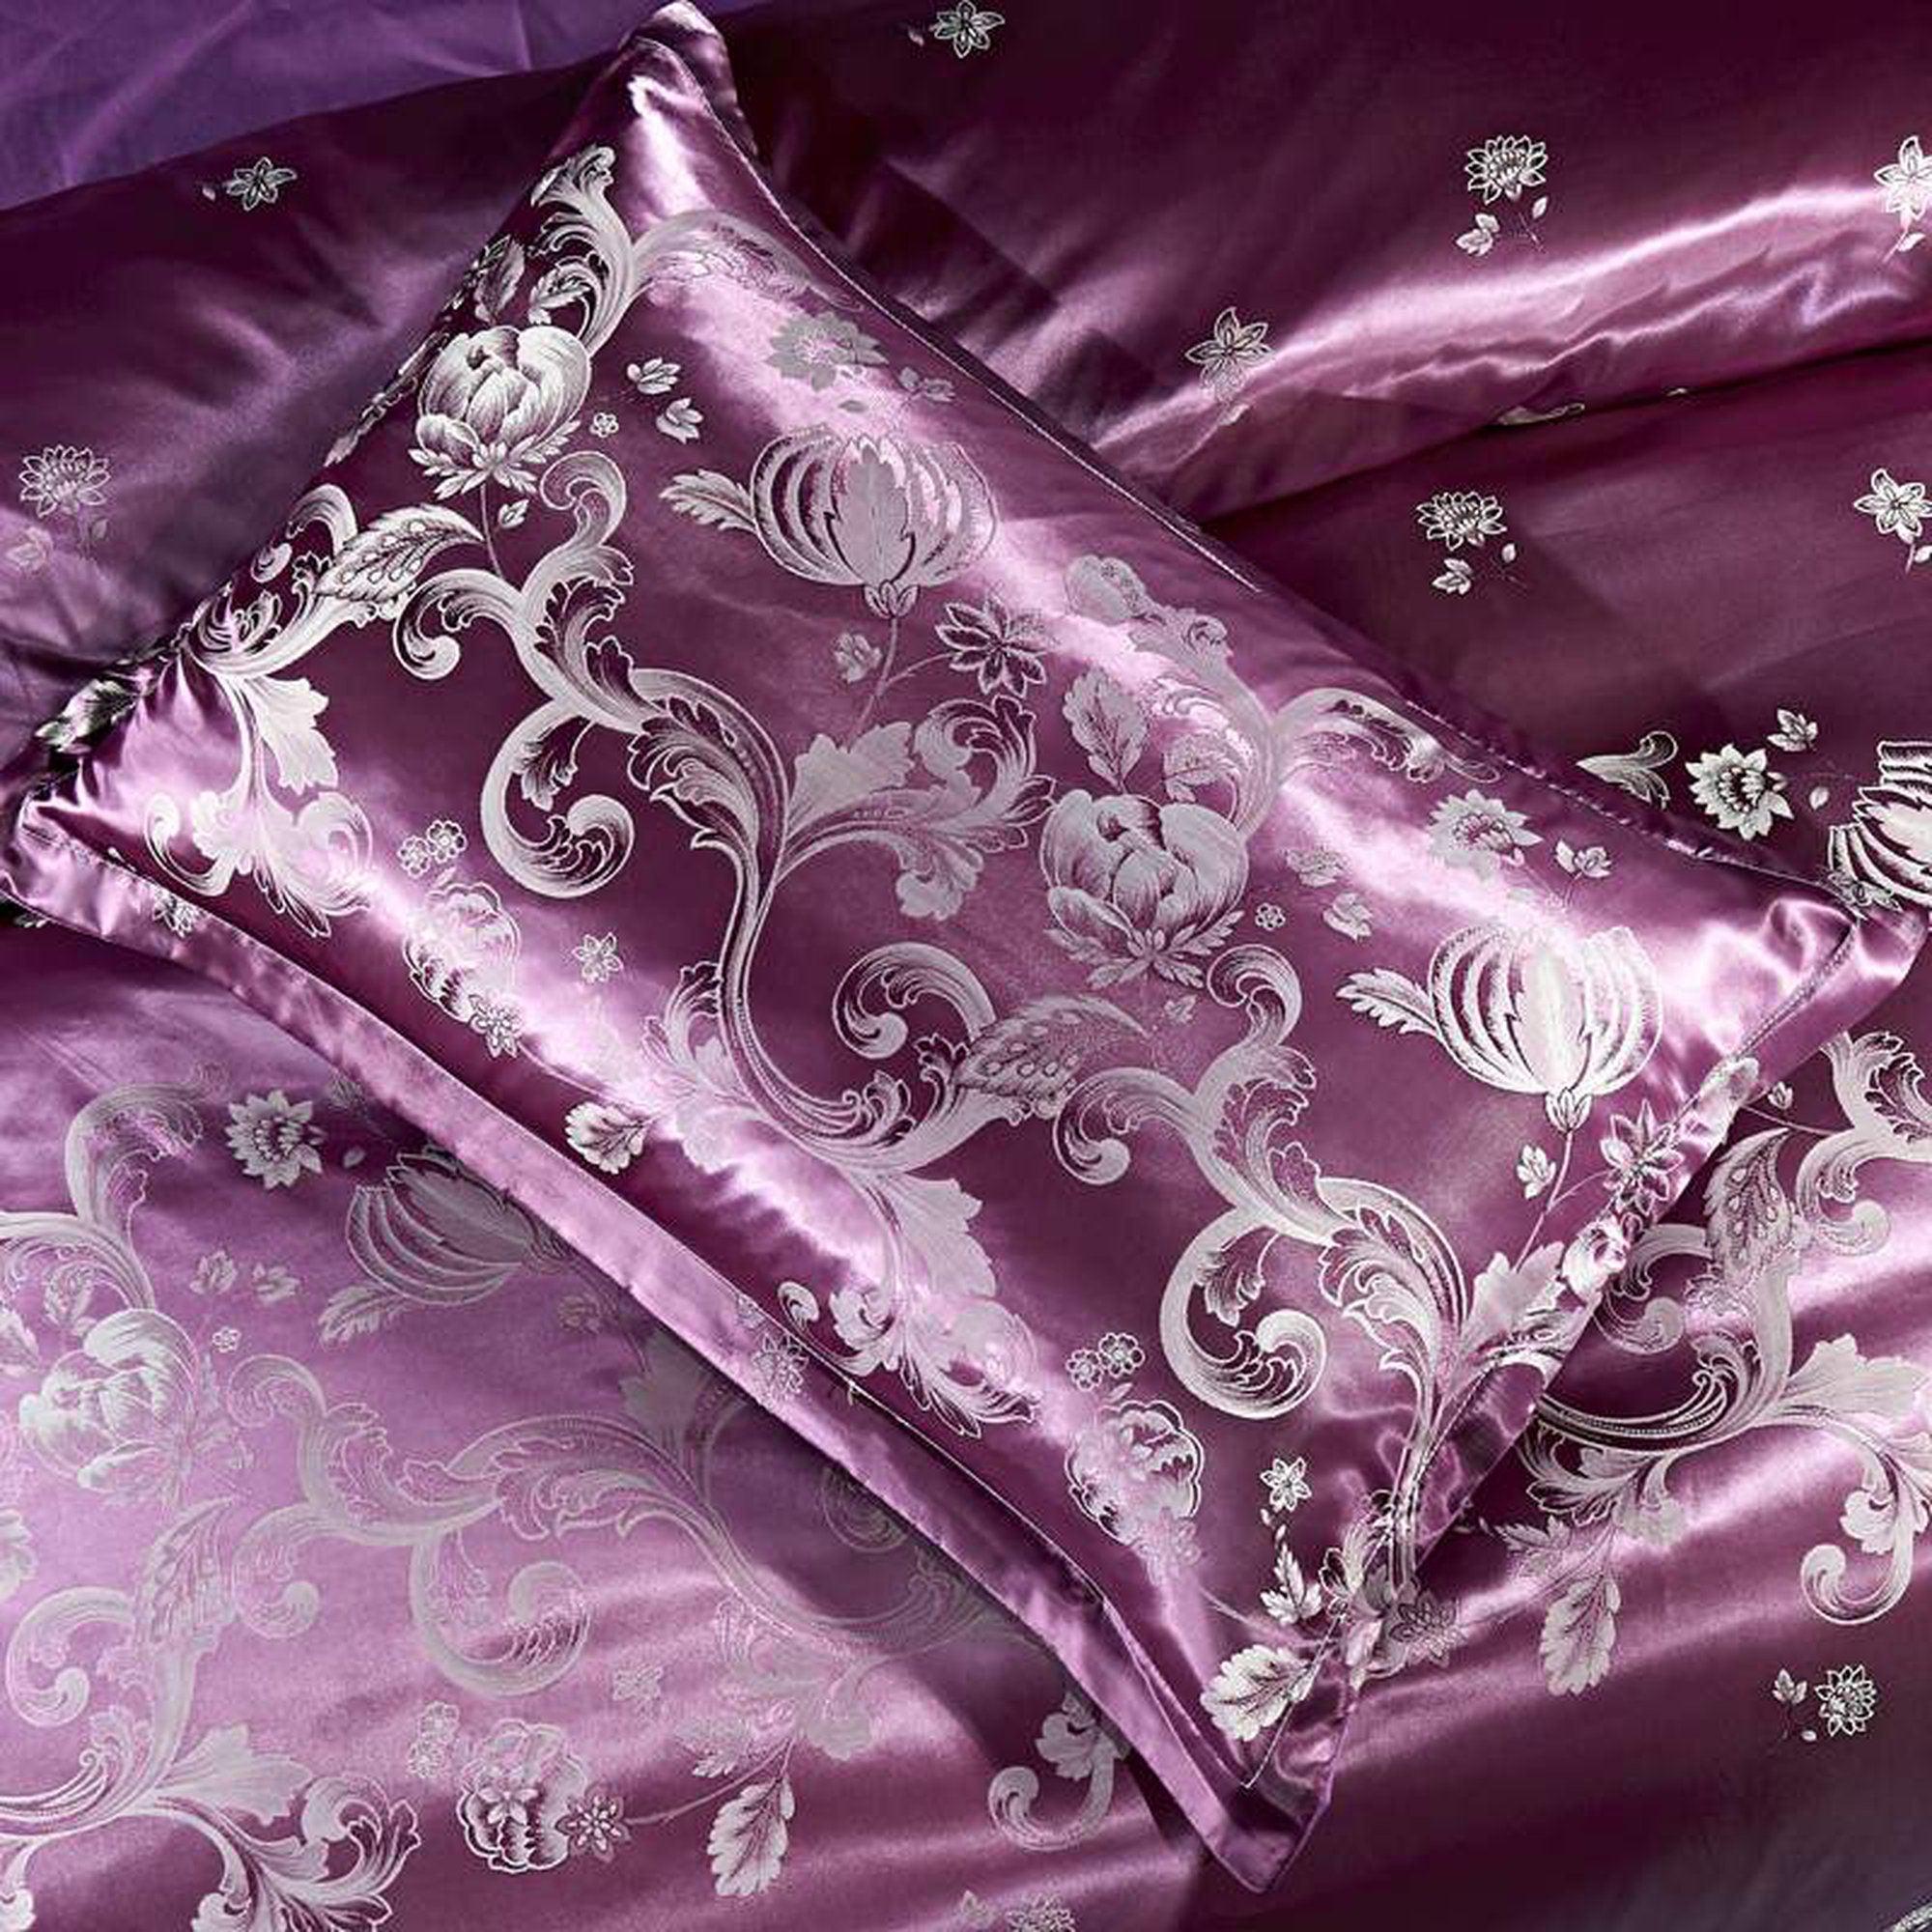 daintyduvet Luxury Pink Duvet Cover Set, Jacquard Fabric Aesthetic Bedding Decorative, Embroidered Bedding Set